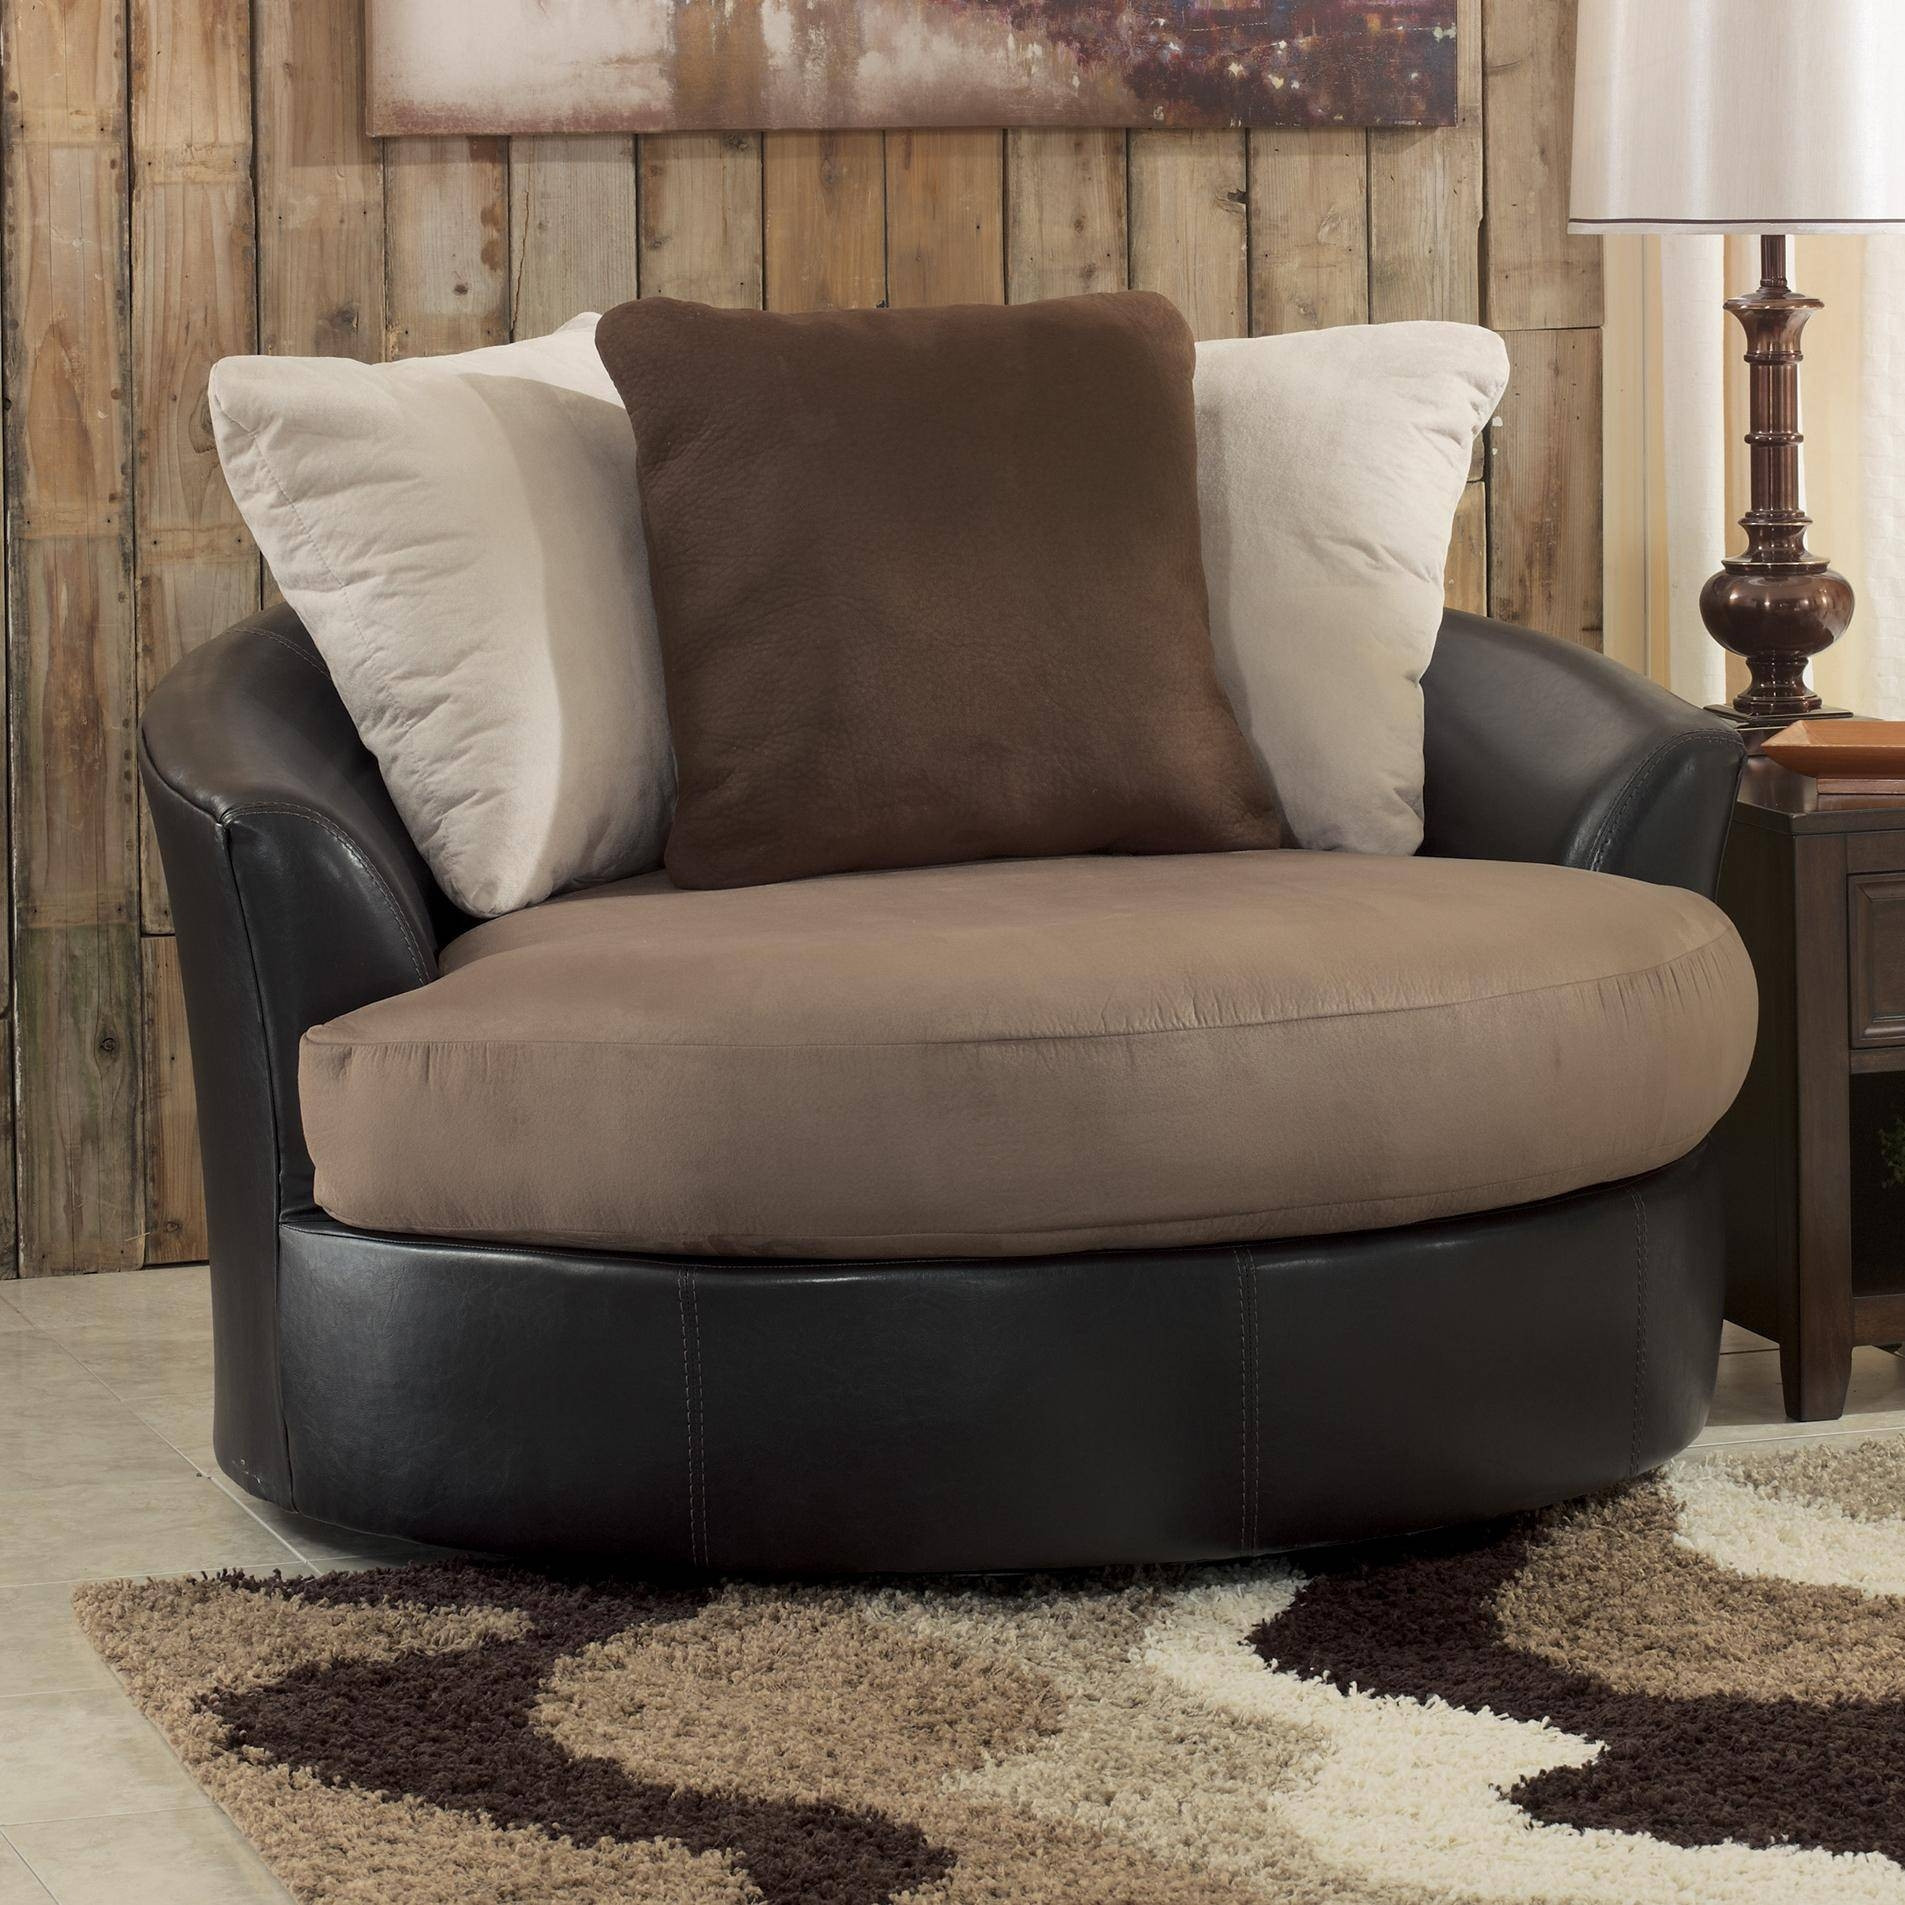 Oversized Chair For Living Room
 30 s Round Swivel Sofa Chairs